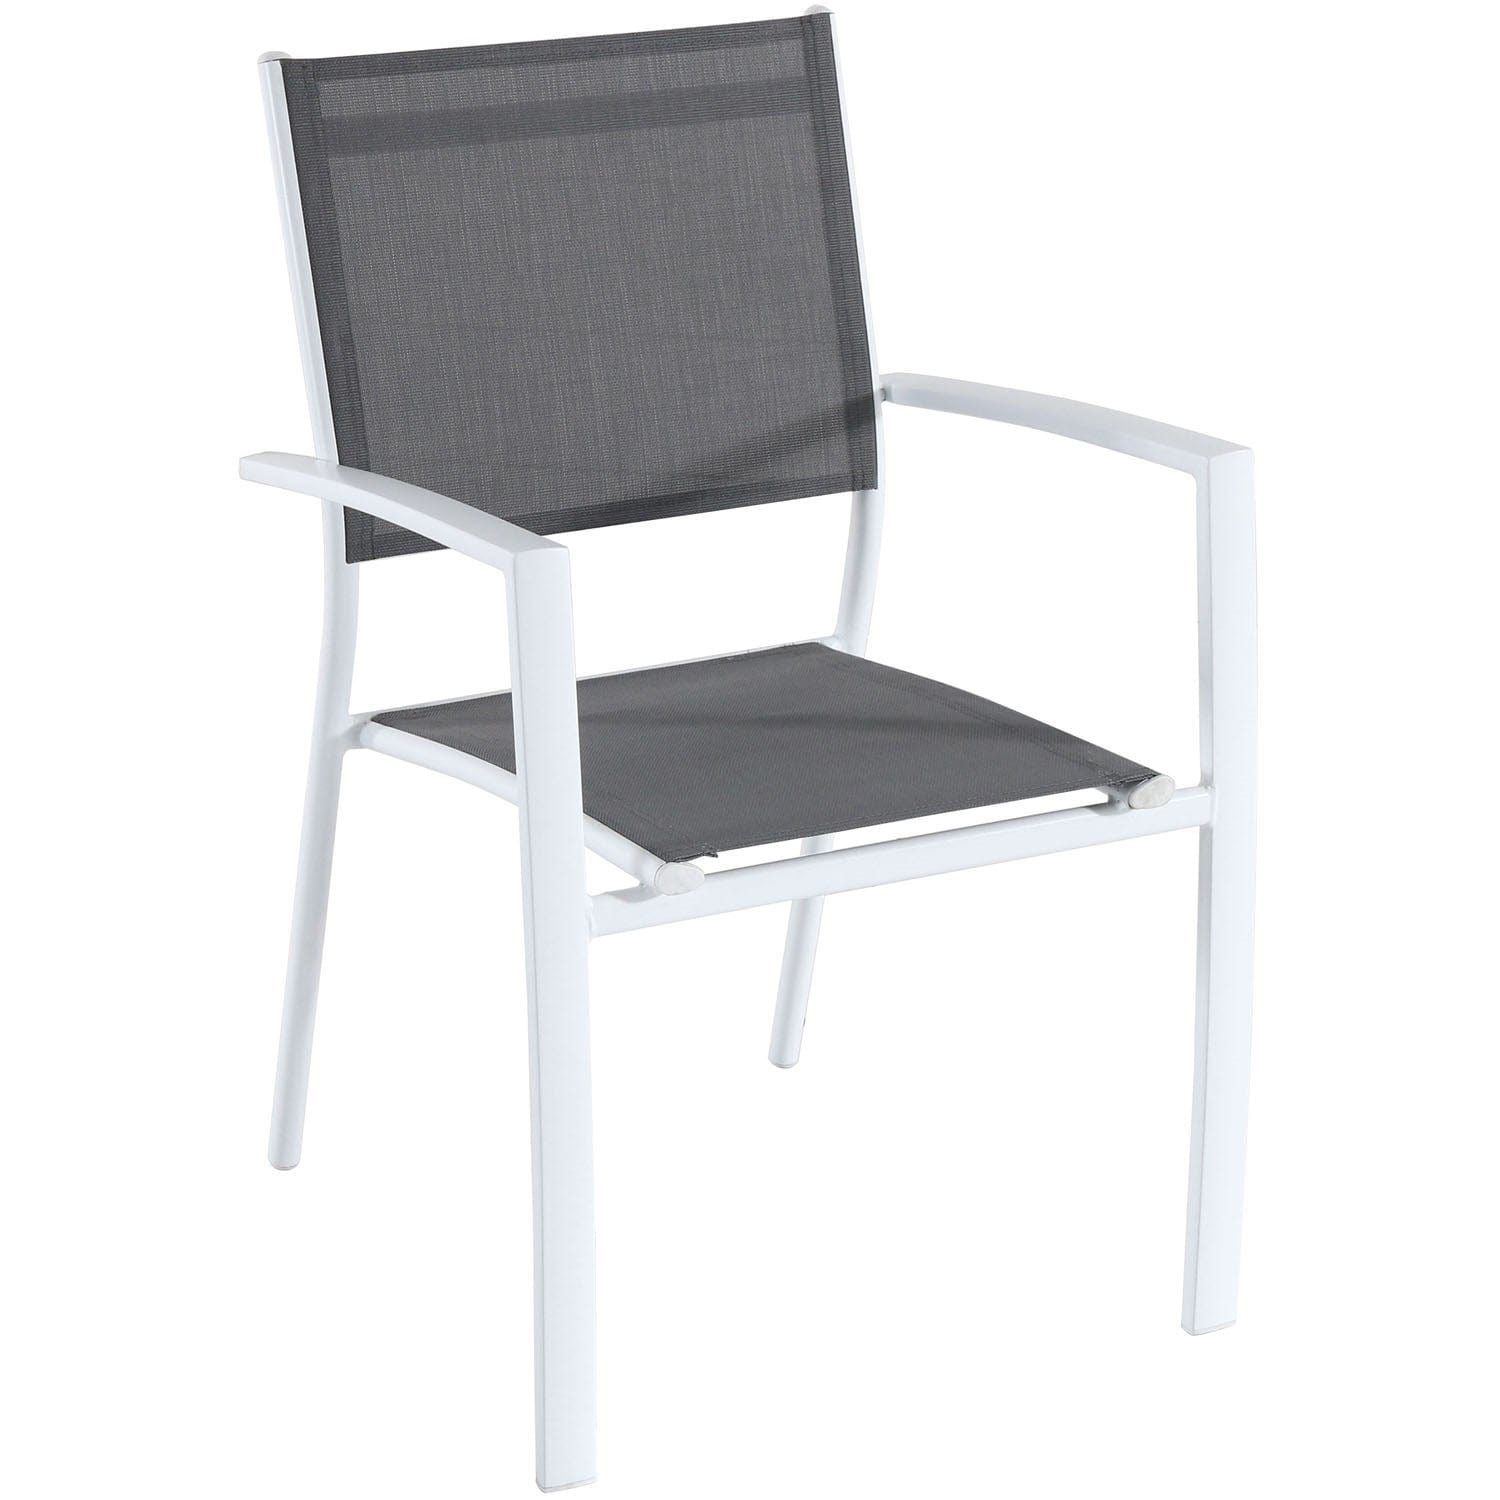 Hanover Outdoor Dining Set Hanover - Naples7pc: 6 Aluminum Sling Chairs, Aluminum Extension Table